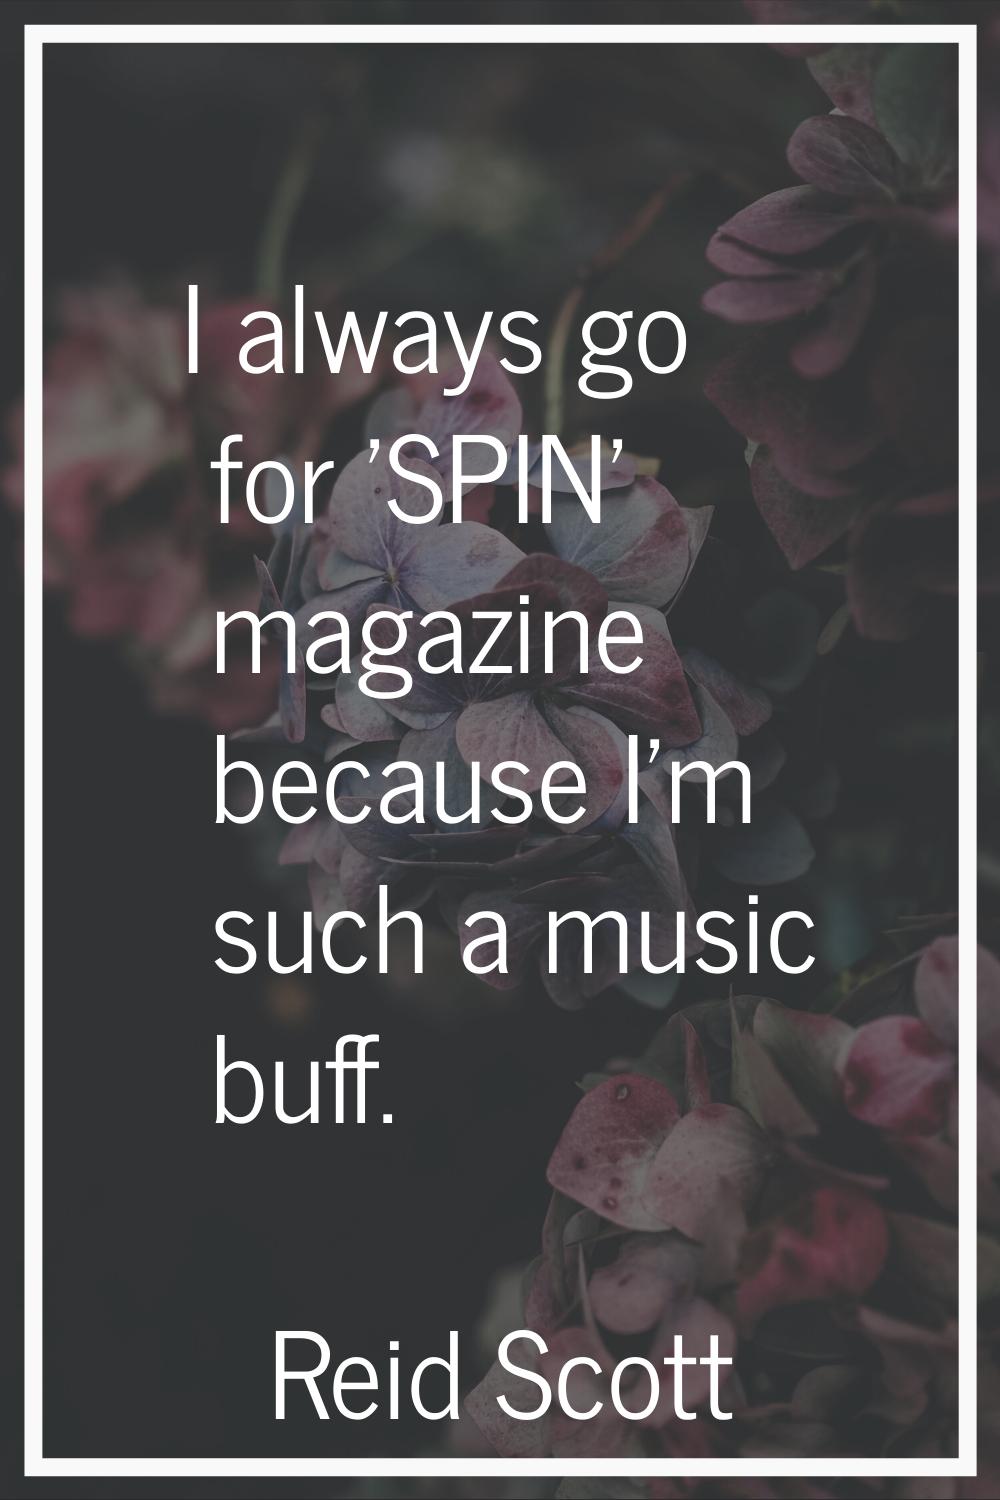 I always go for 'SPIN' magazine because I'm such a music buff.